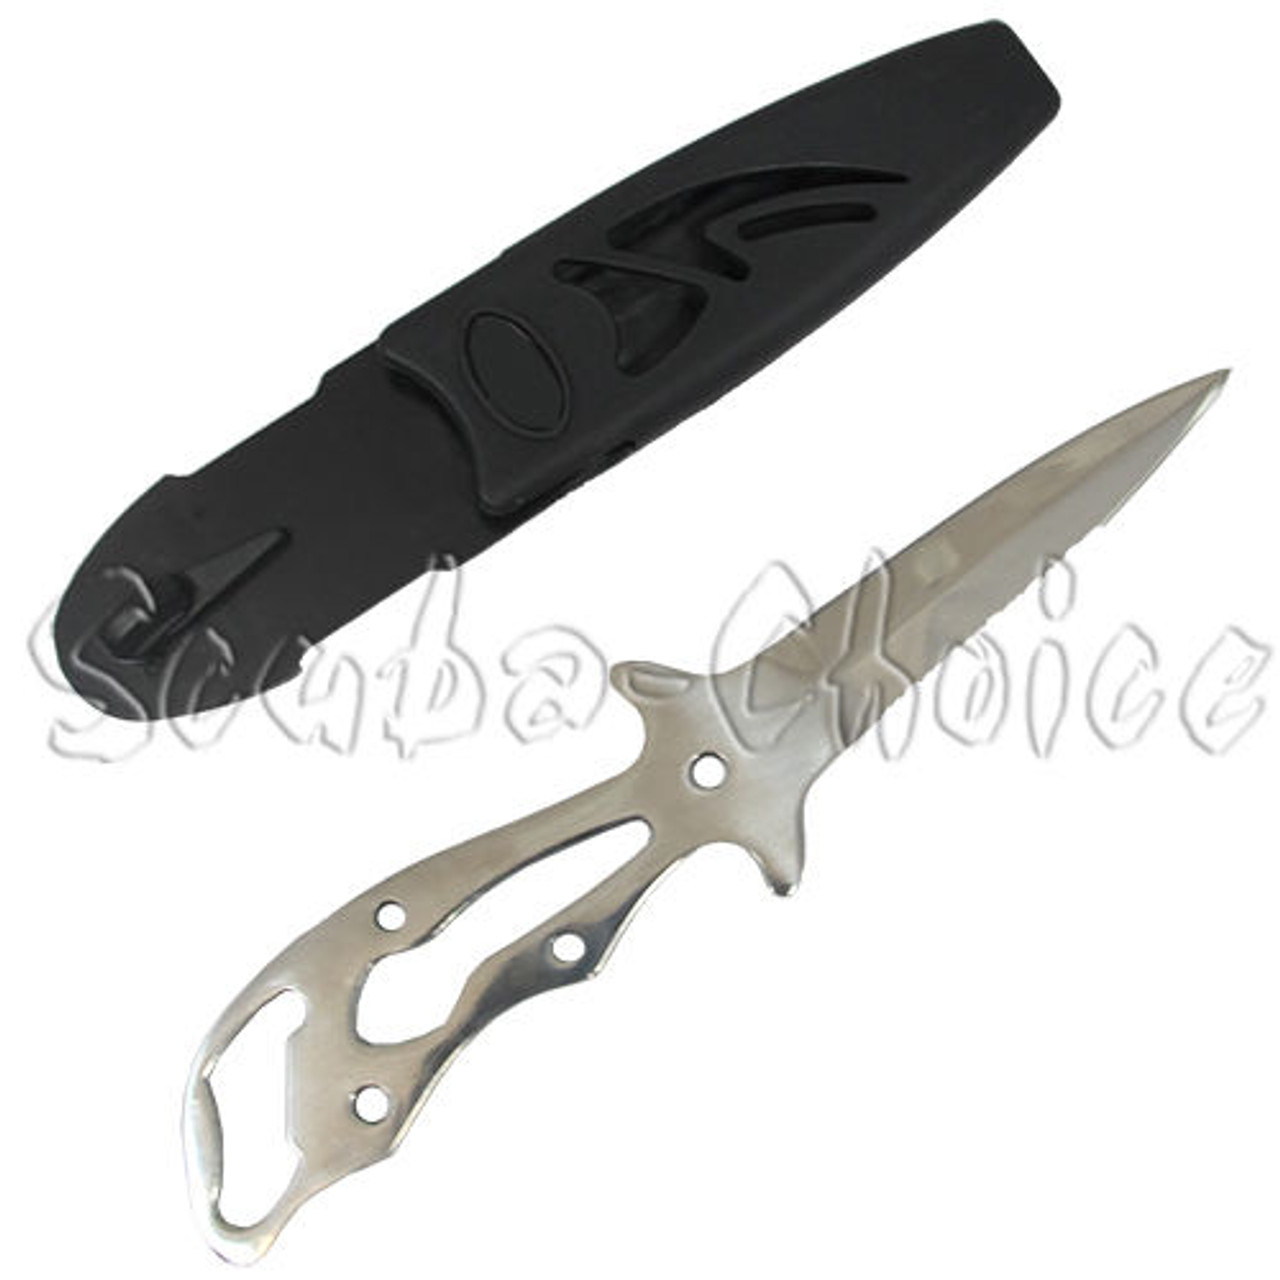 Scuba Diving 8 Spearfishing Low Volume Stainless Steel Knife w/ 2 Straps